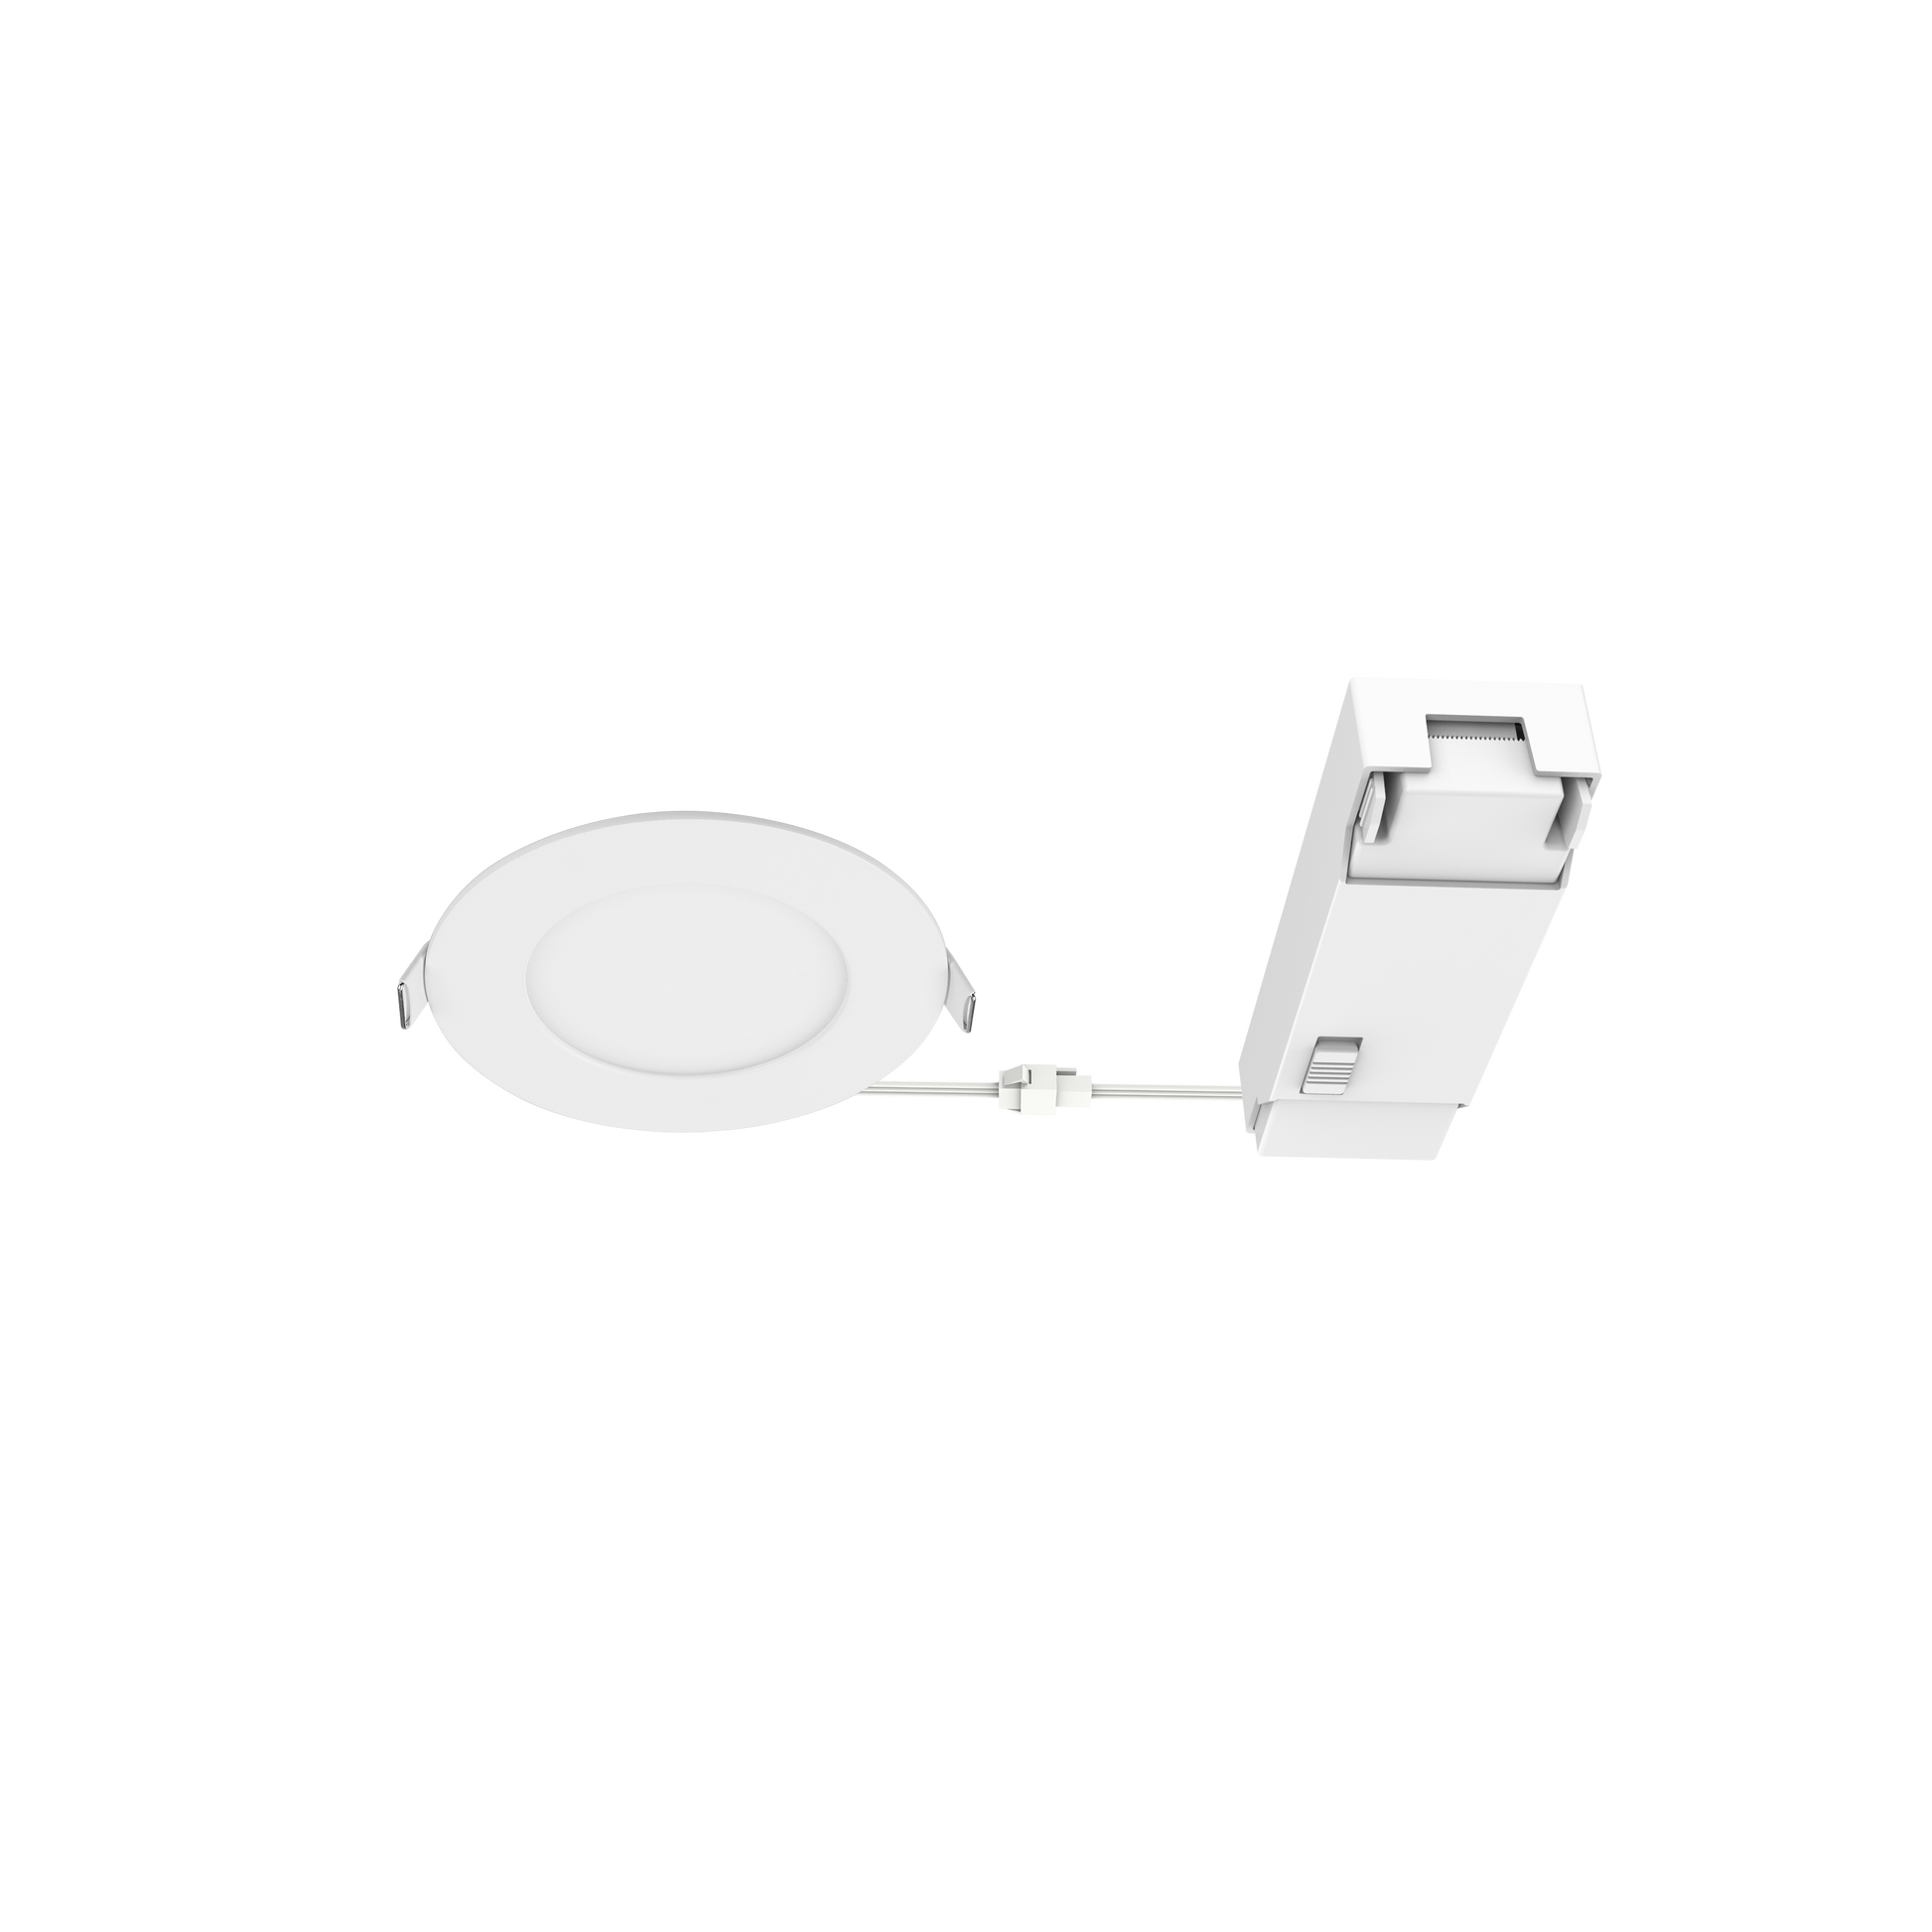 RECESSED SPOTLIGHT EXTRAFLAT WHITE D10.8 CM LED 9W CCT DIMMABLE